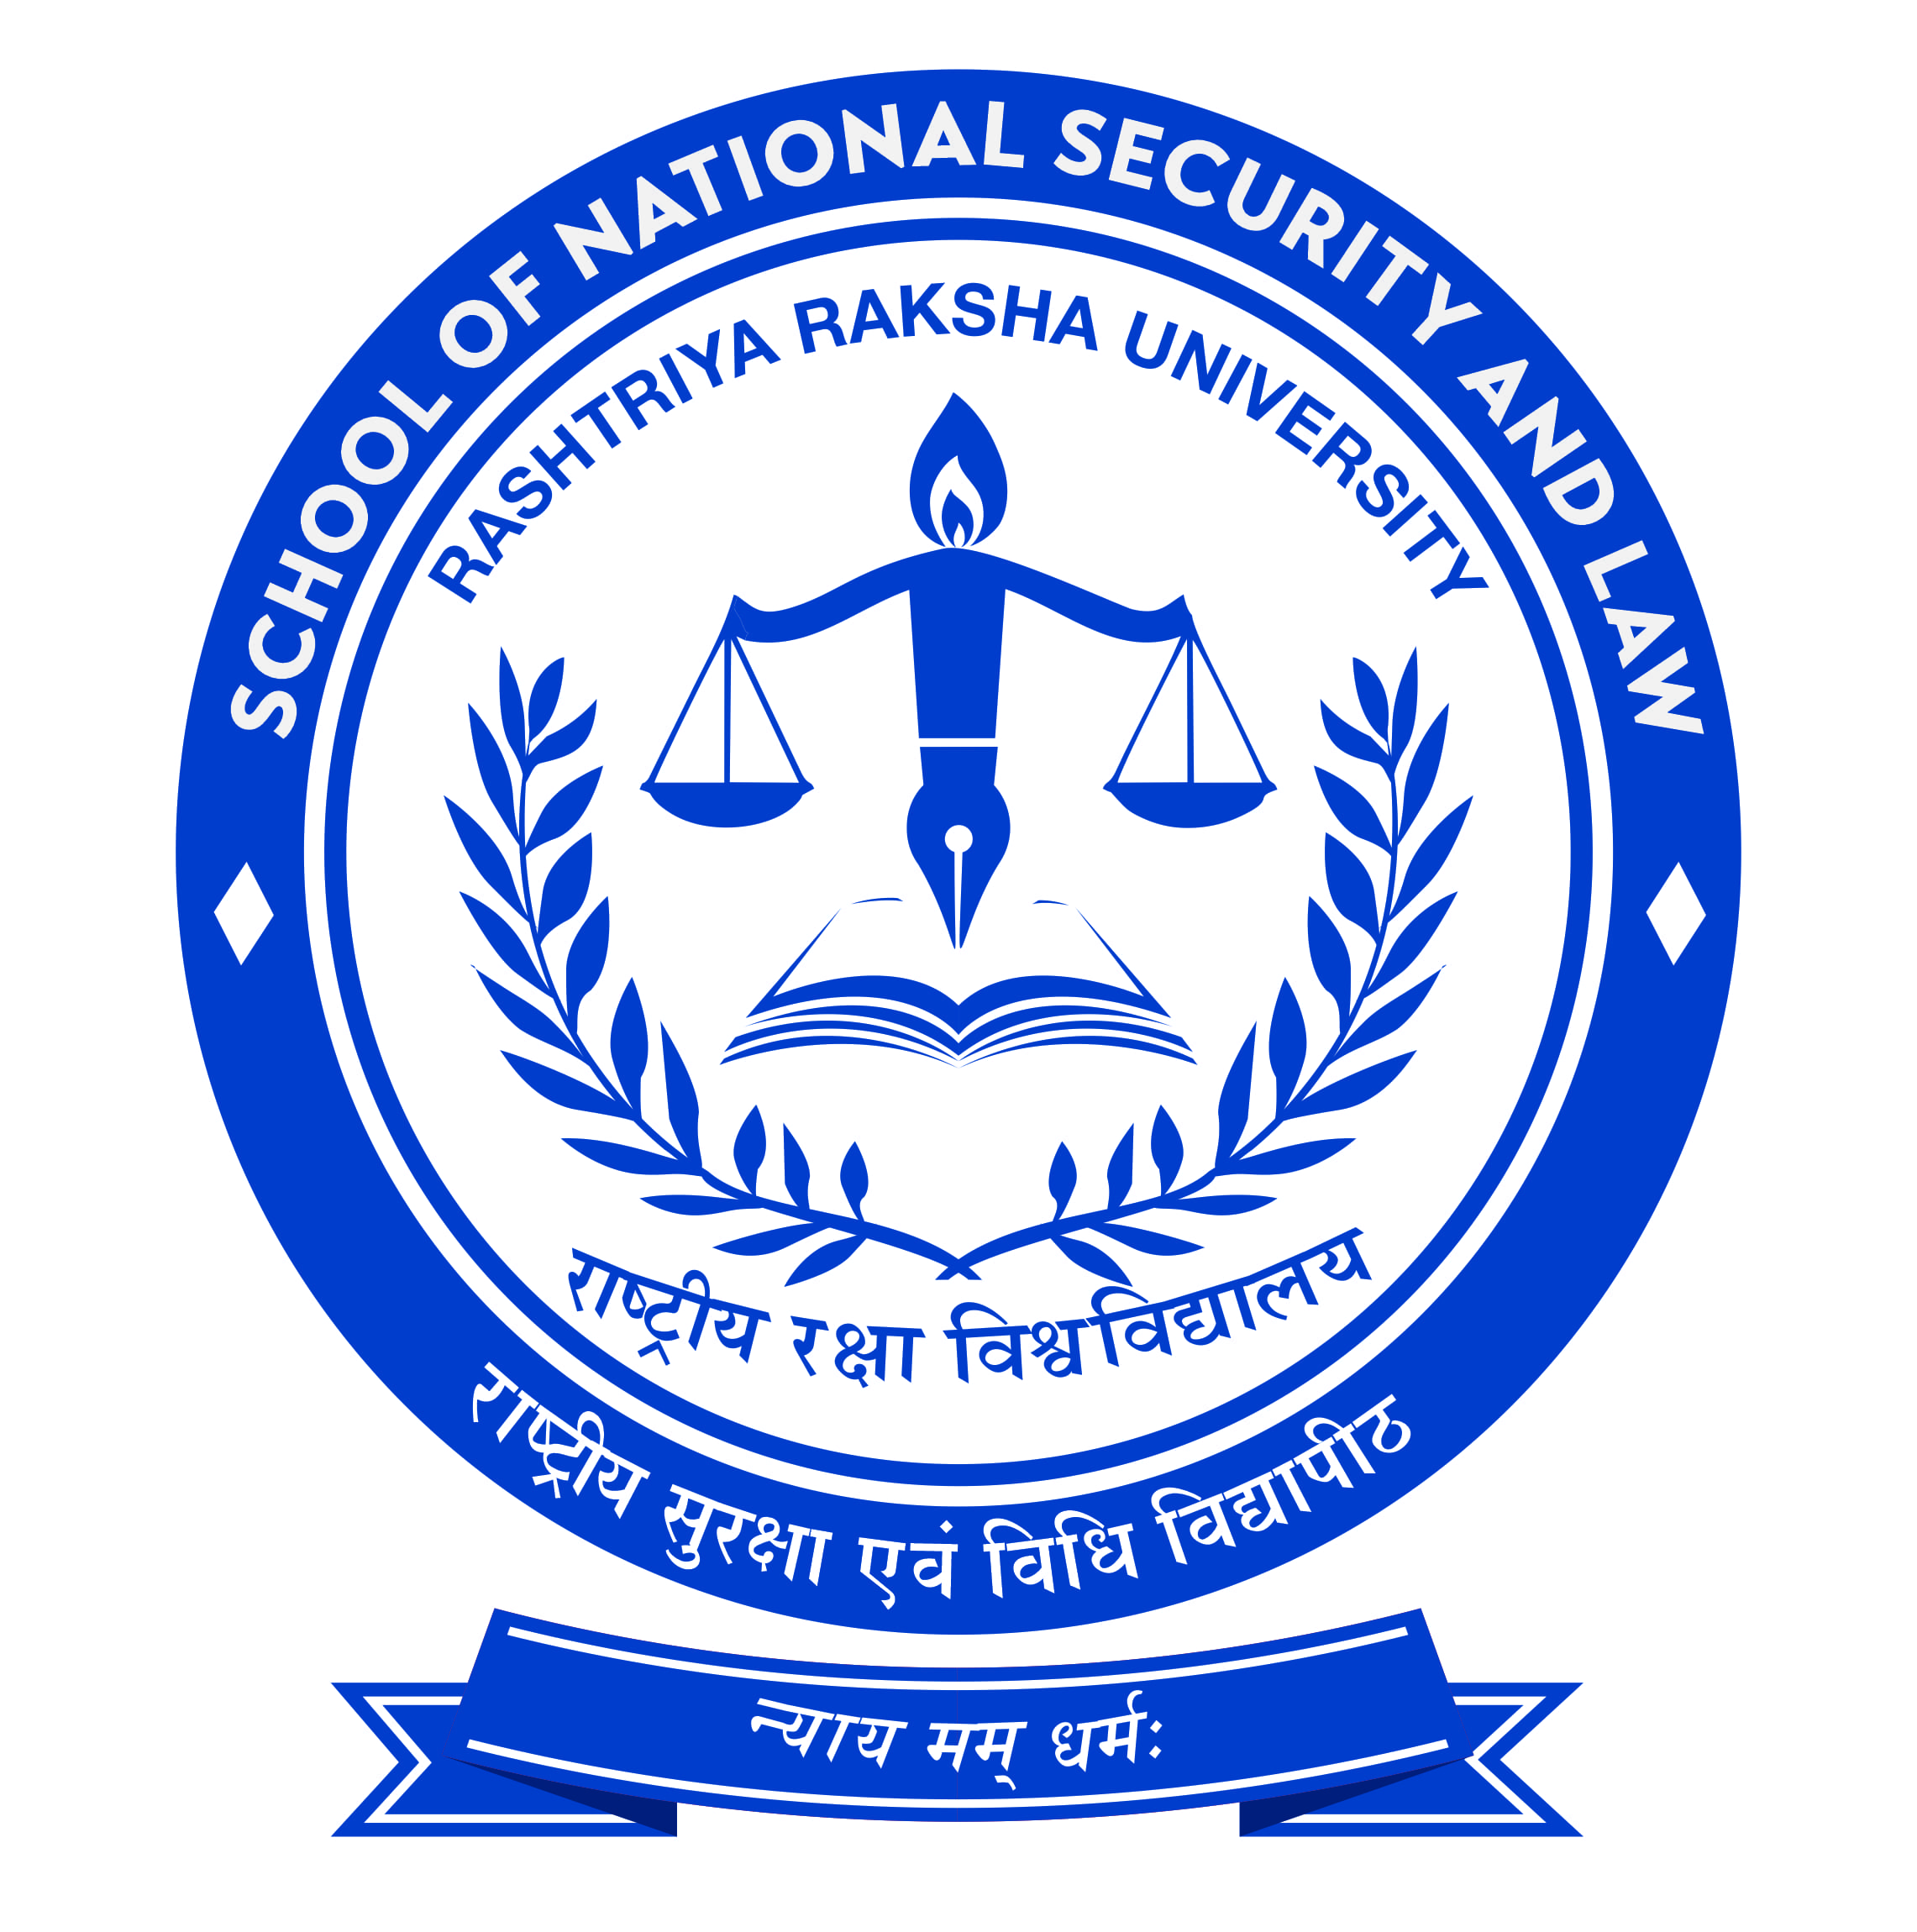 School of National Security and Law (SNSL)